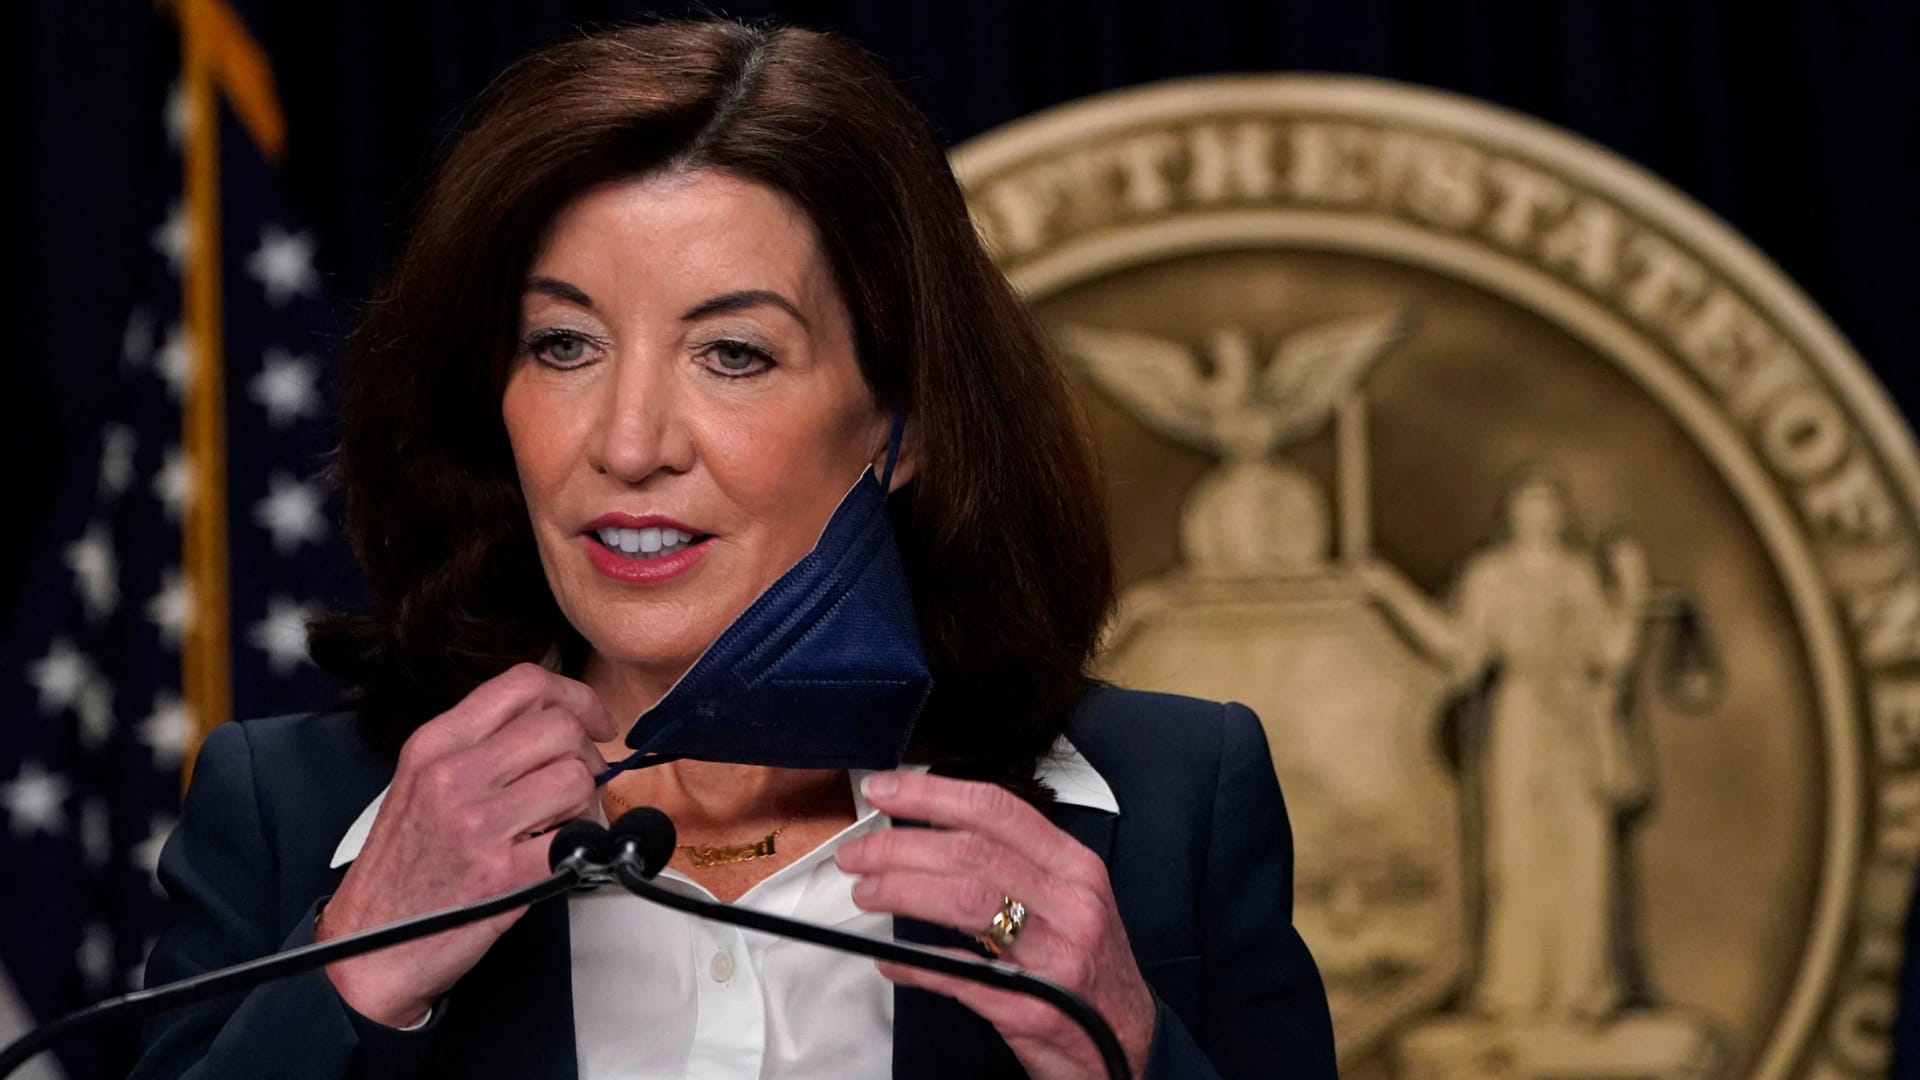 New York Governor Kathy Hochul during a press conference regarding the expiration of the state's indoor mask mandate in New York on February 9, 2022.